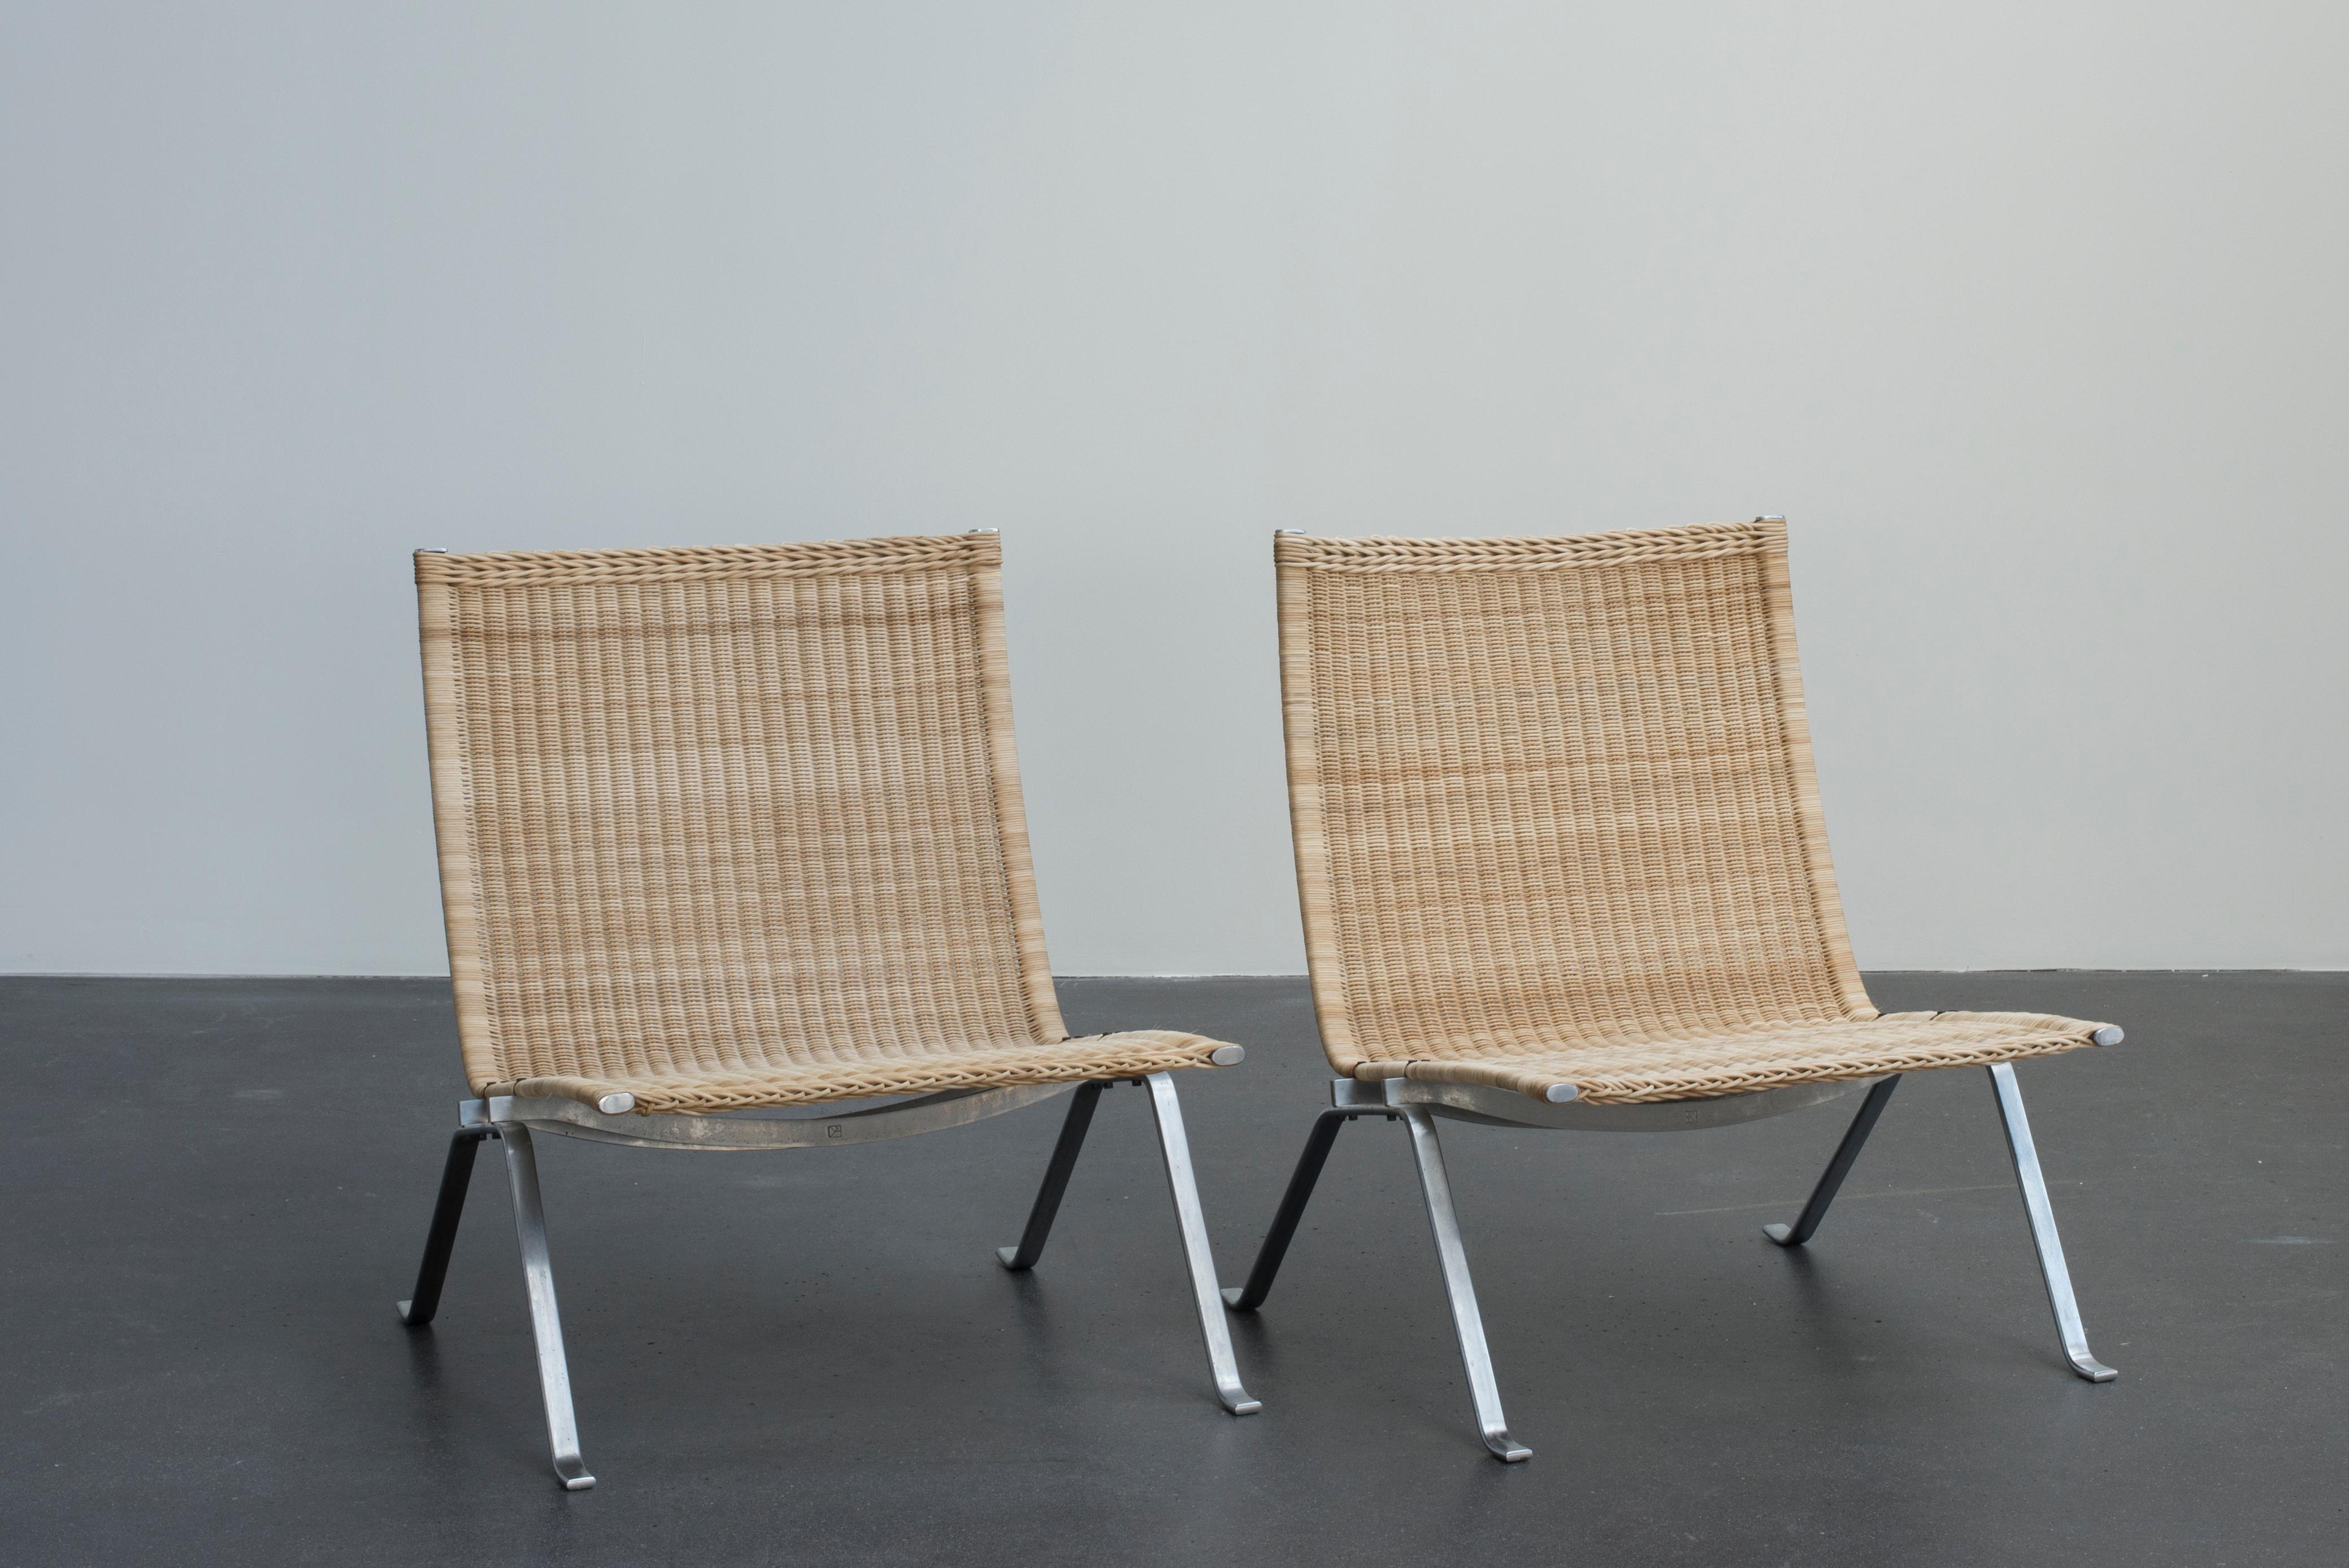 Poul Kjaerholm pair of PK22 easy chairs in dull chromium-plated steel and cane. Executed by E. Kold Christensen, Denmark.